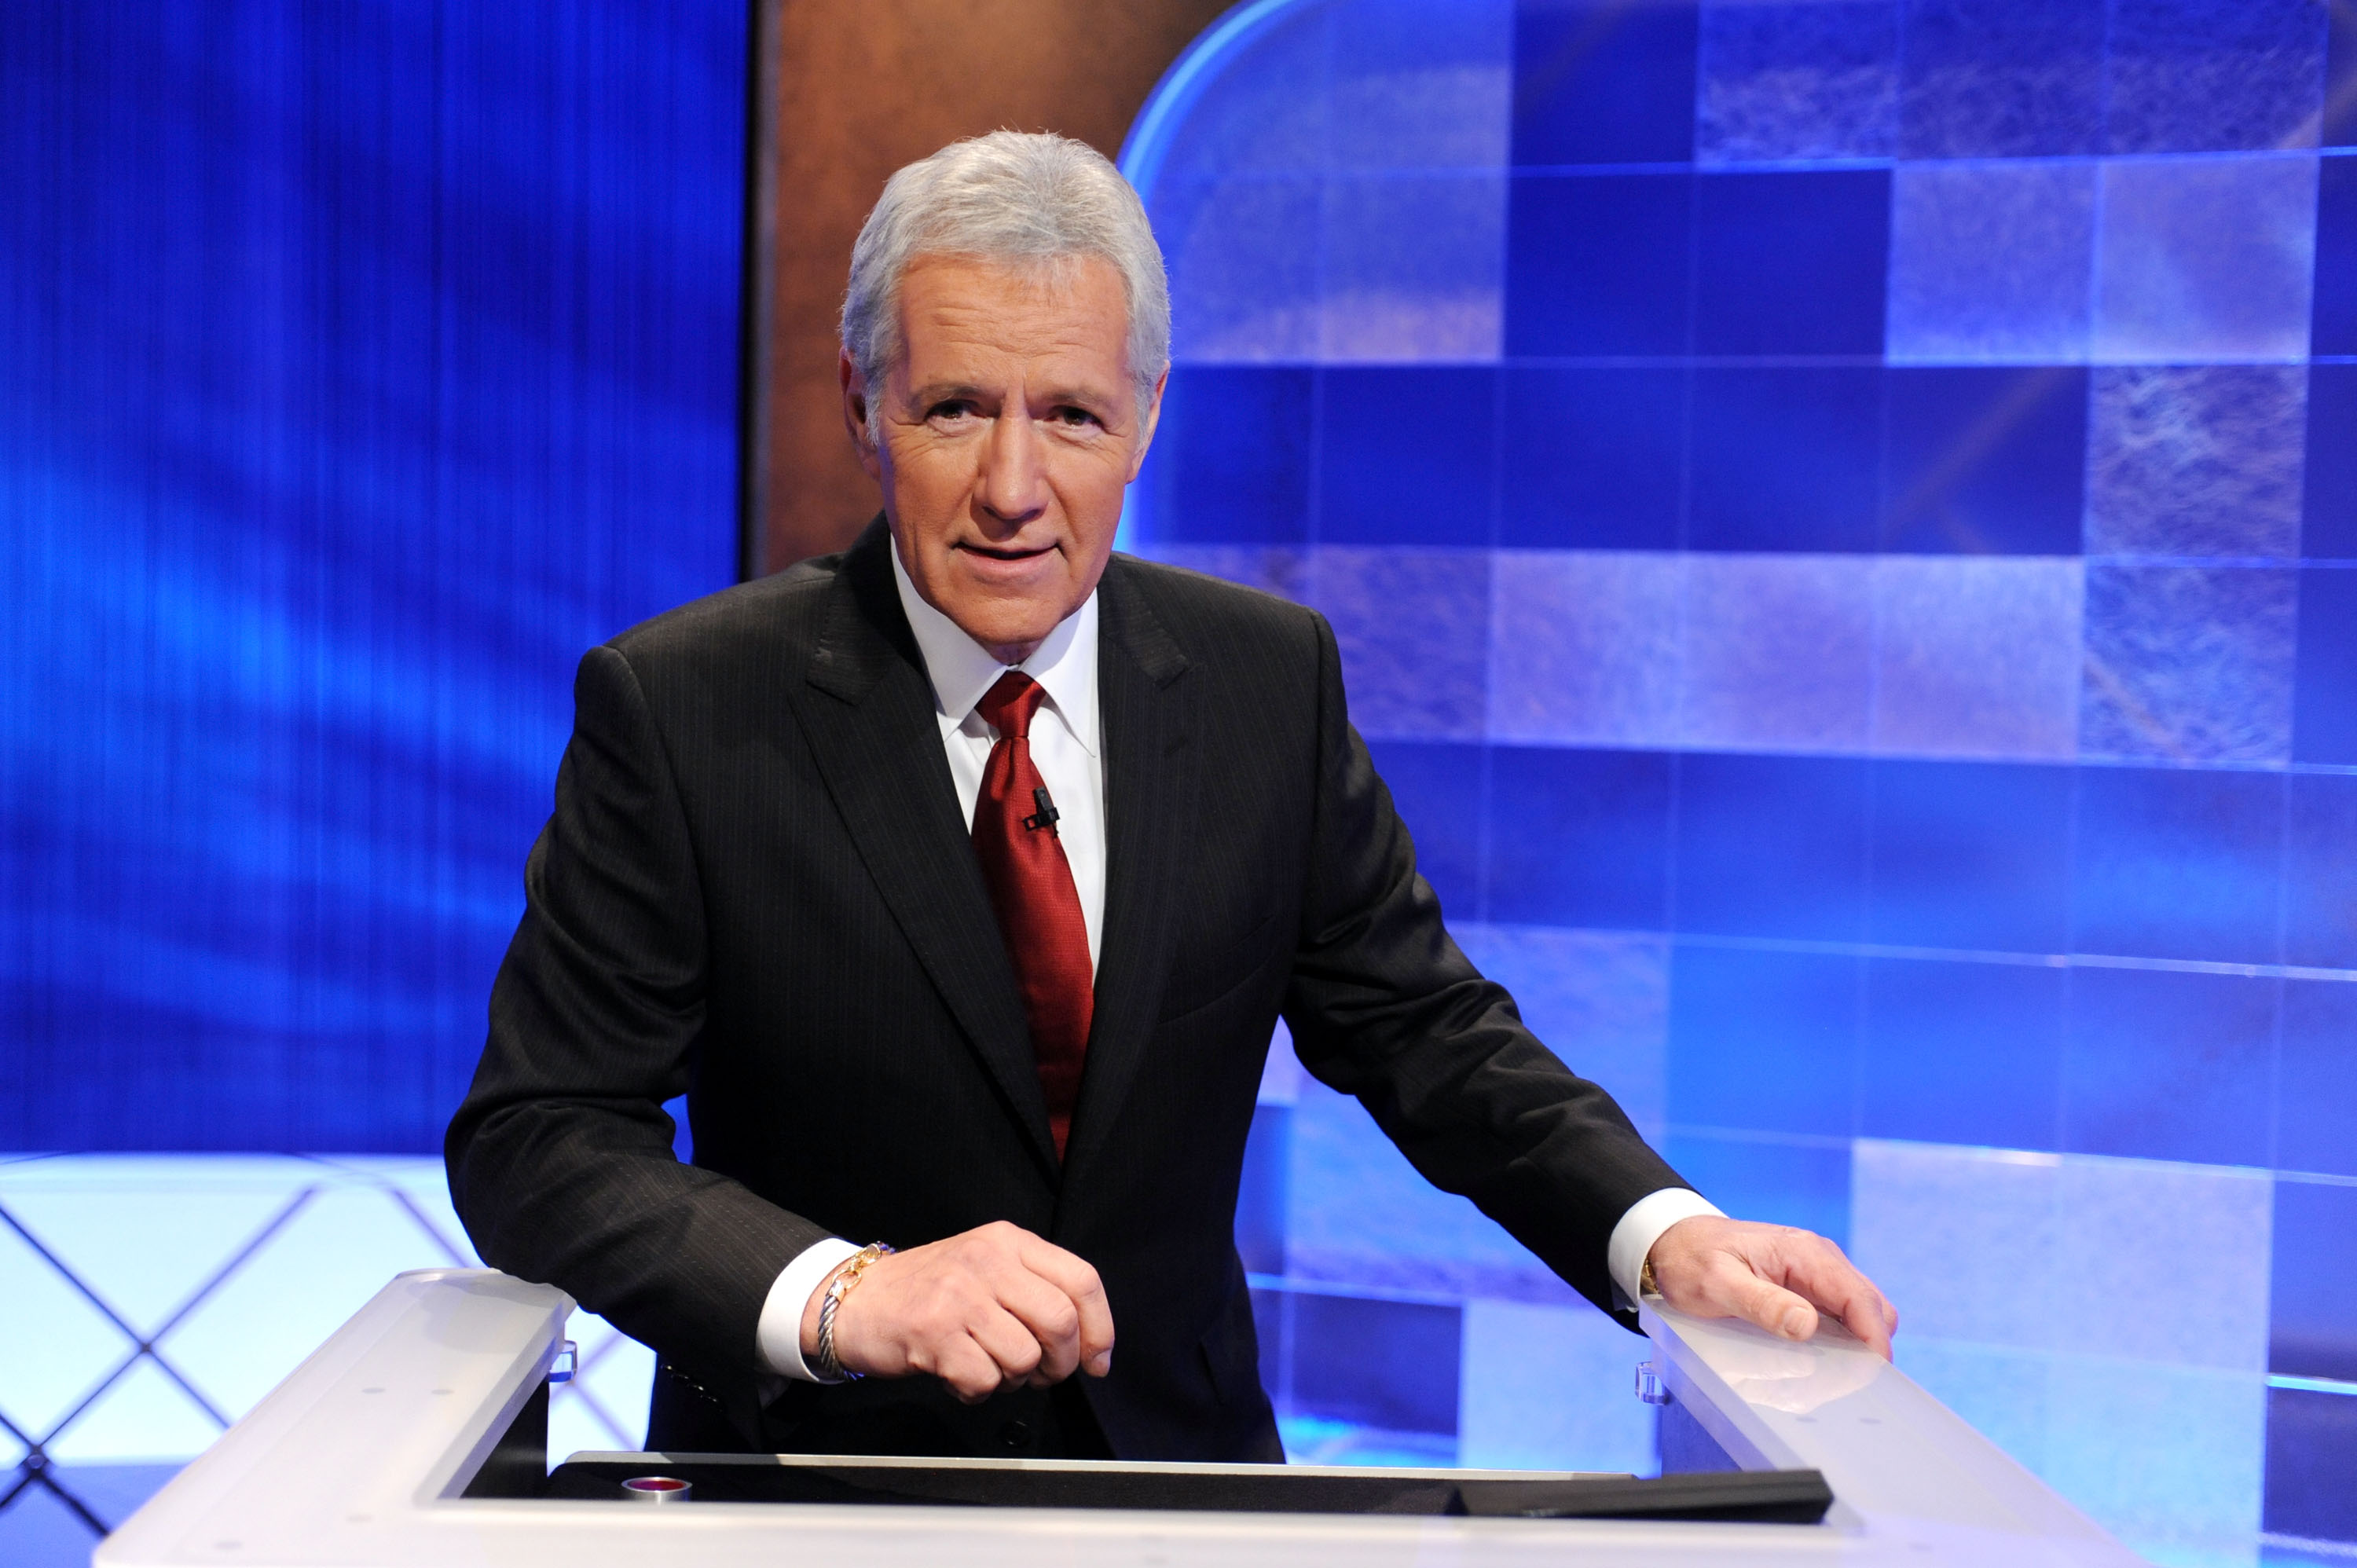 Game show host Alex Trebek poses on the set of the 'Jeopardy!' Million Dollar Celebrity Invitational Tournament Show Taping